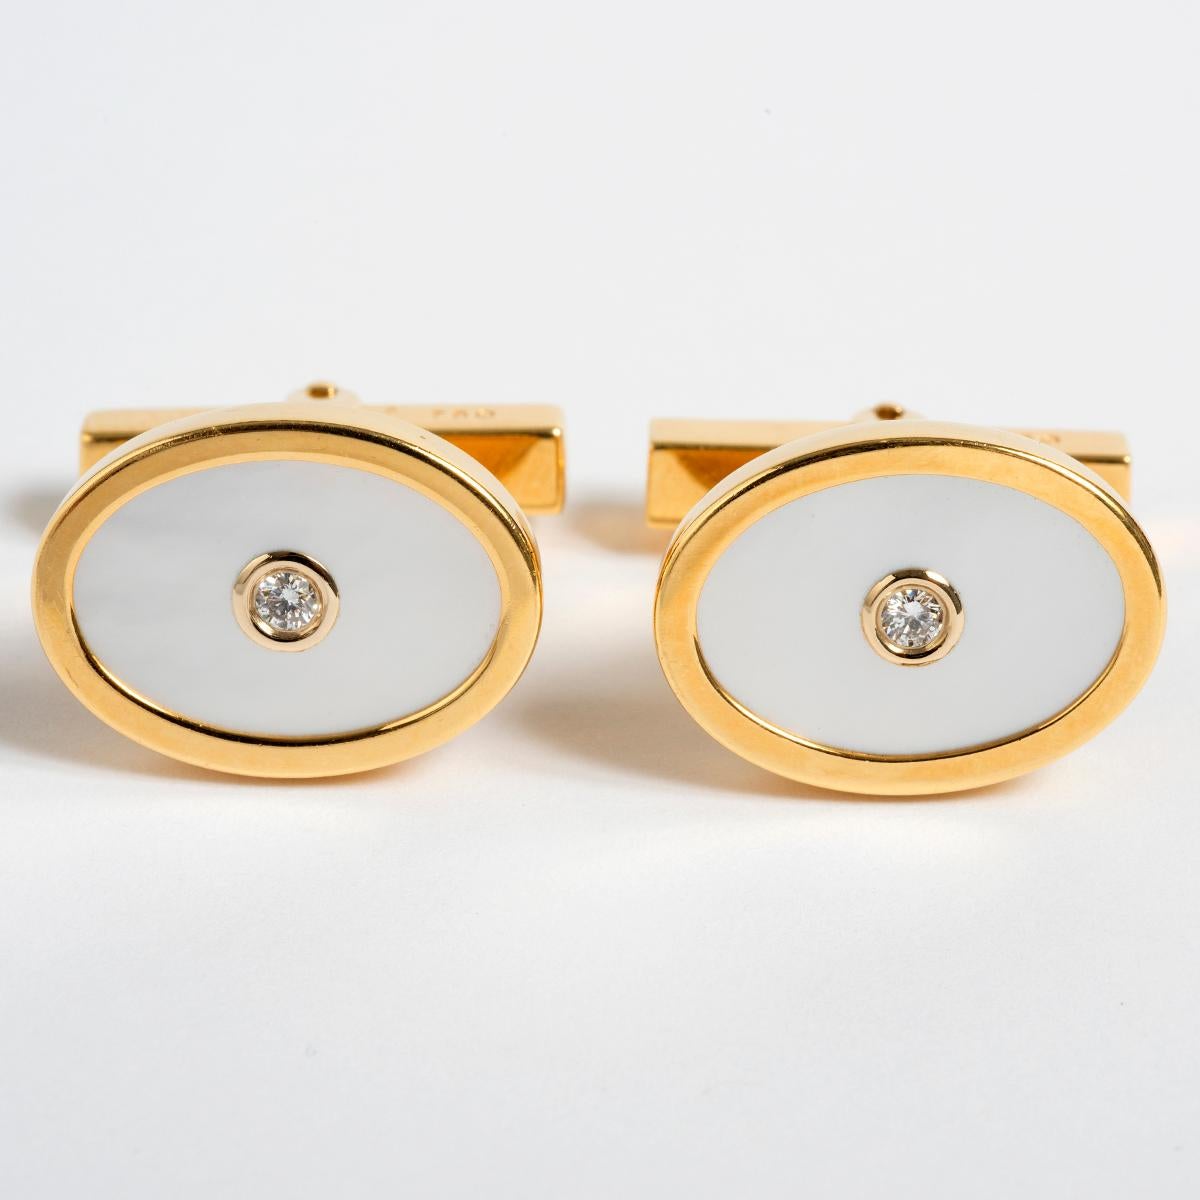 Tiffany & Co Yellow Gold, Mother of Pearl, Diamond Centre Cufflinks. 1